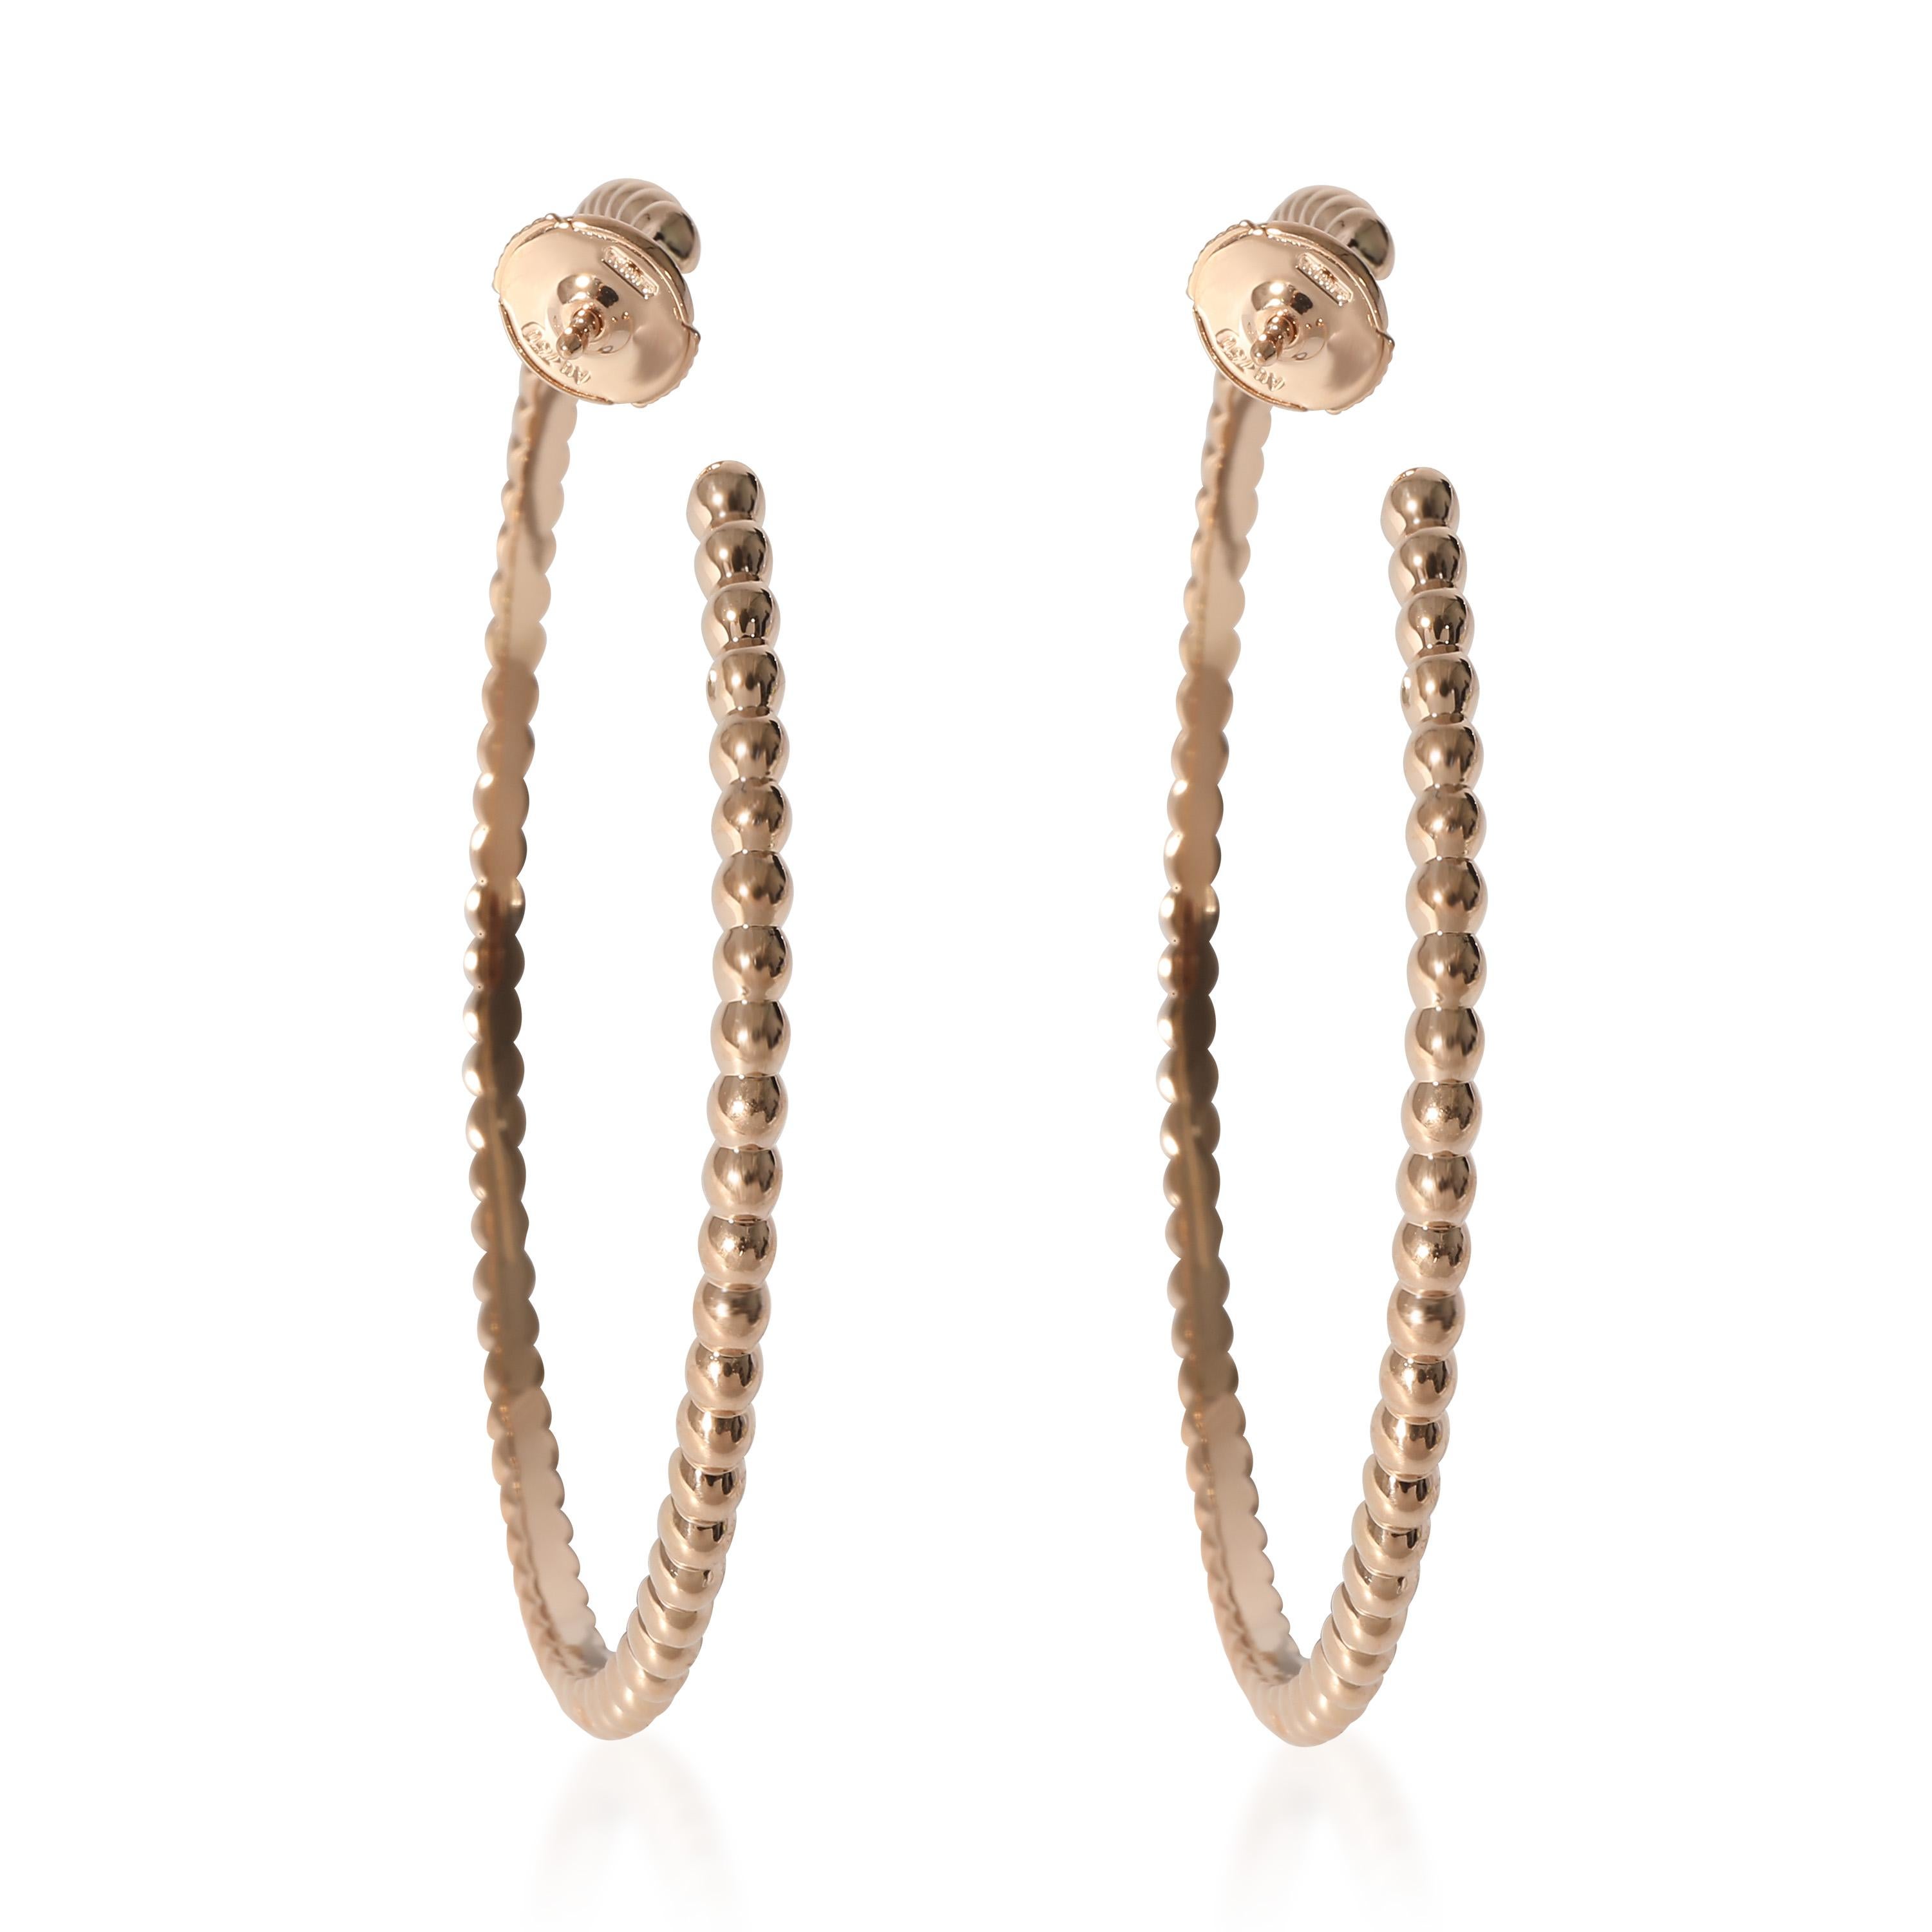 Van Cleef & Arpels Large Perlee Hoop Earrings in 18k Rose Gold

PRIMARY DETAILS
SKU: 135347
Listing Title: Van Cleef & Arpels Large Perlee Hoop Earrings in 18k Rose Gold
Condition Description: Drawing inspiration from the traditional Van Cleef &